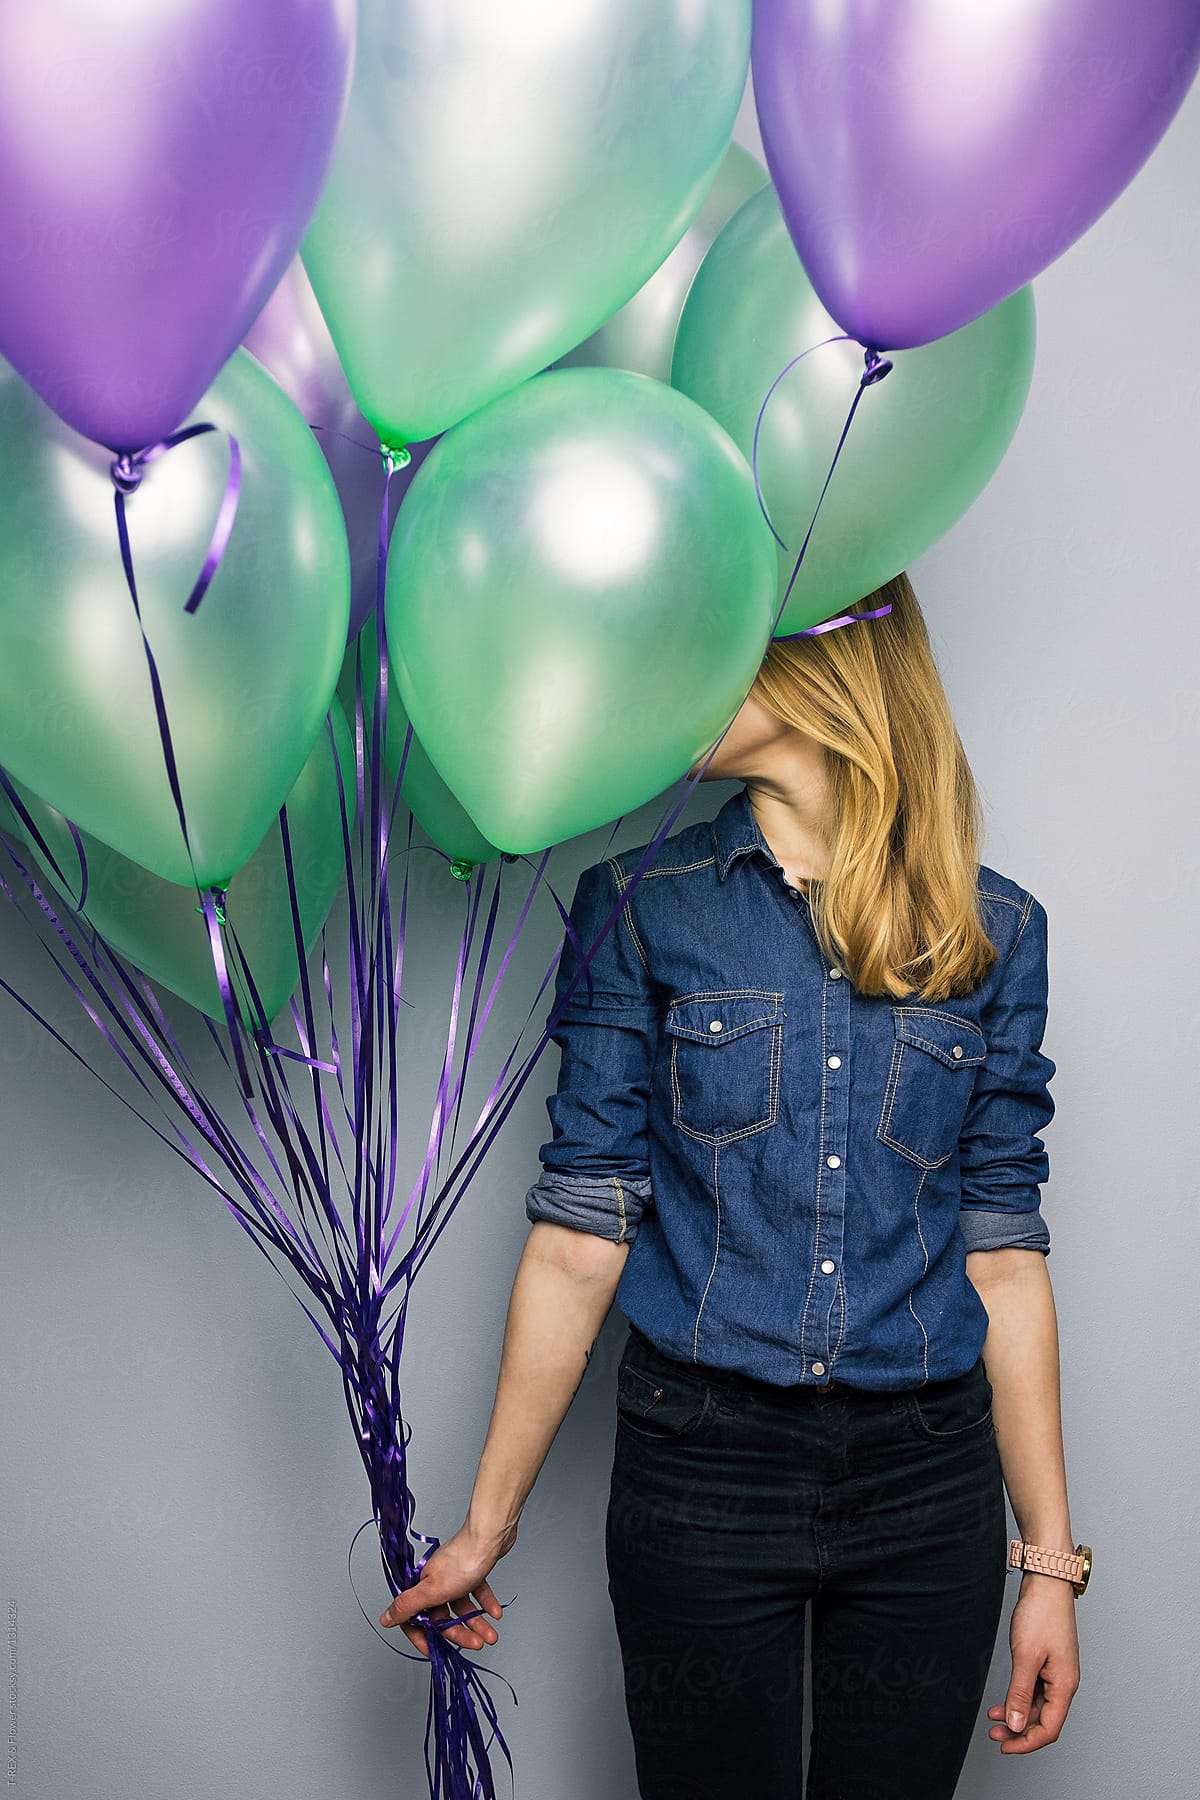 Woman closed face with balloons bunch